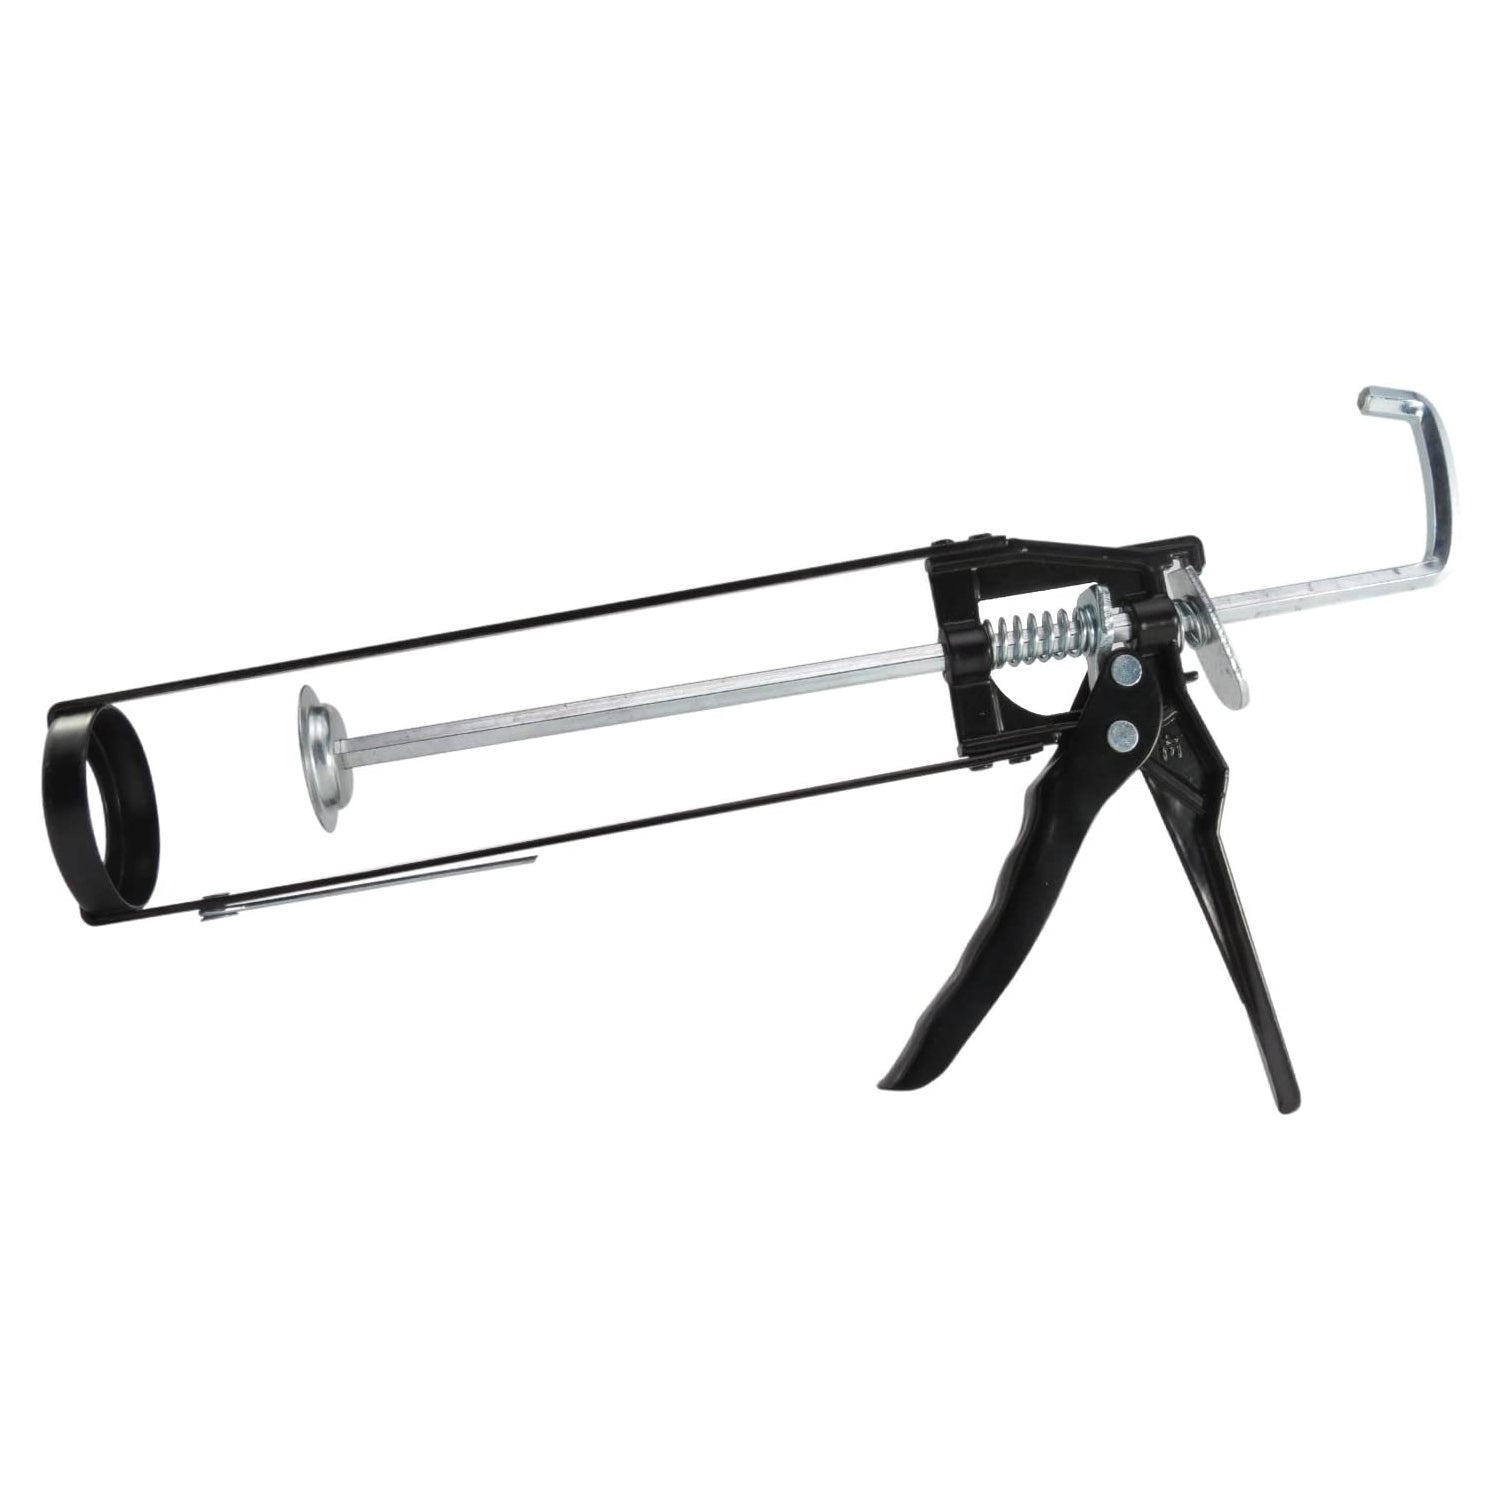 Dynamic Skeleton Style Caulking Gun, available to shop online at Harris Colourcentres in Barbados.